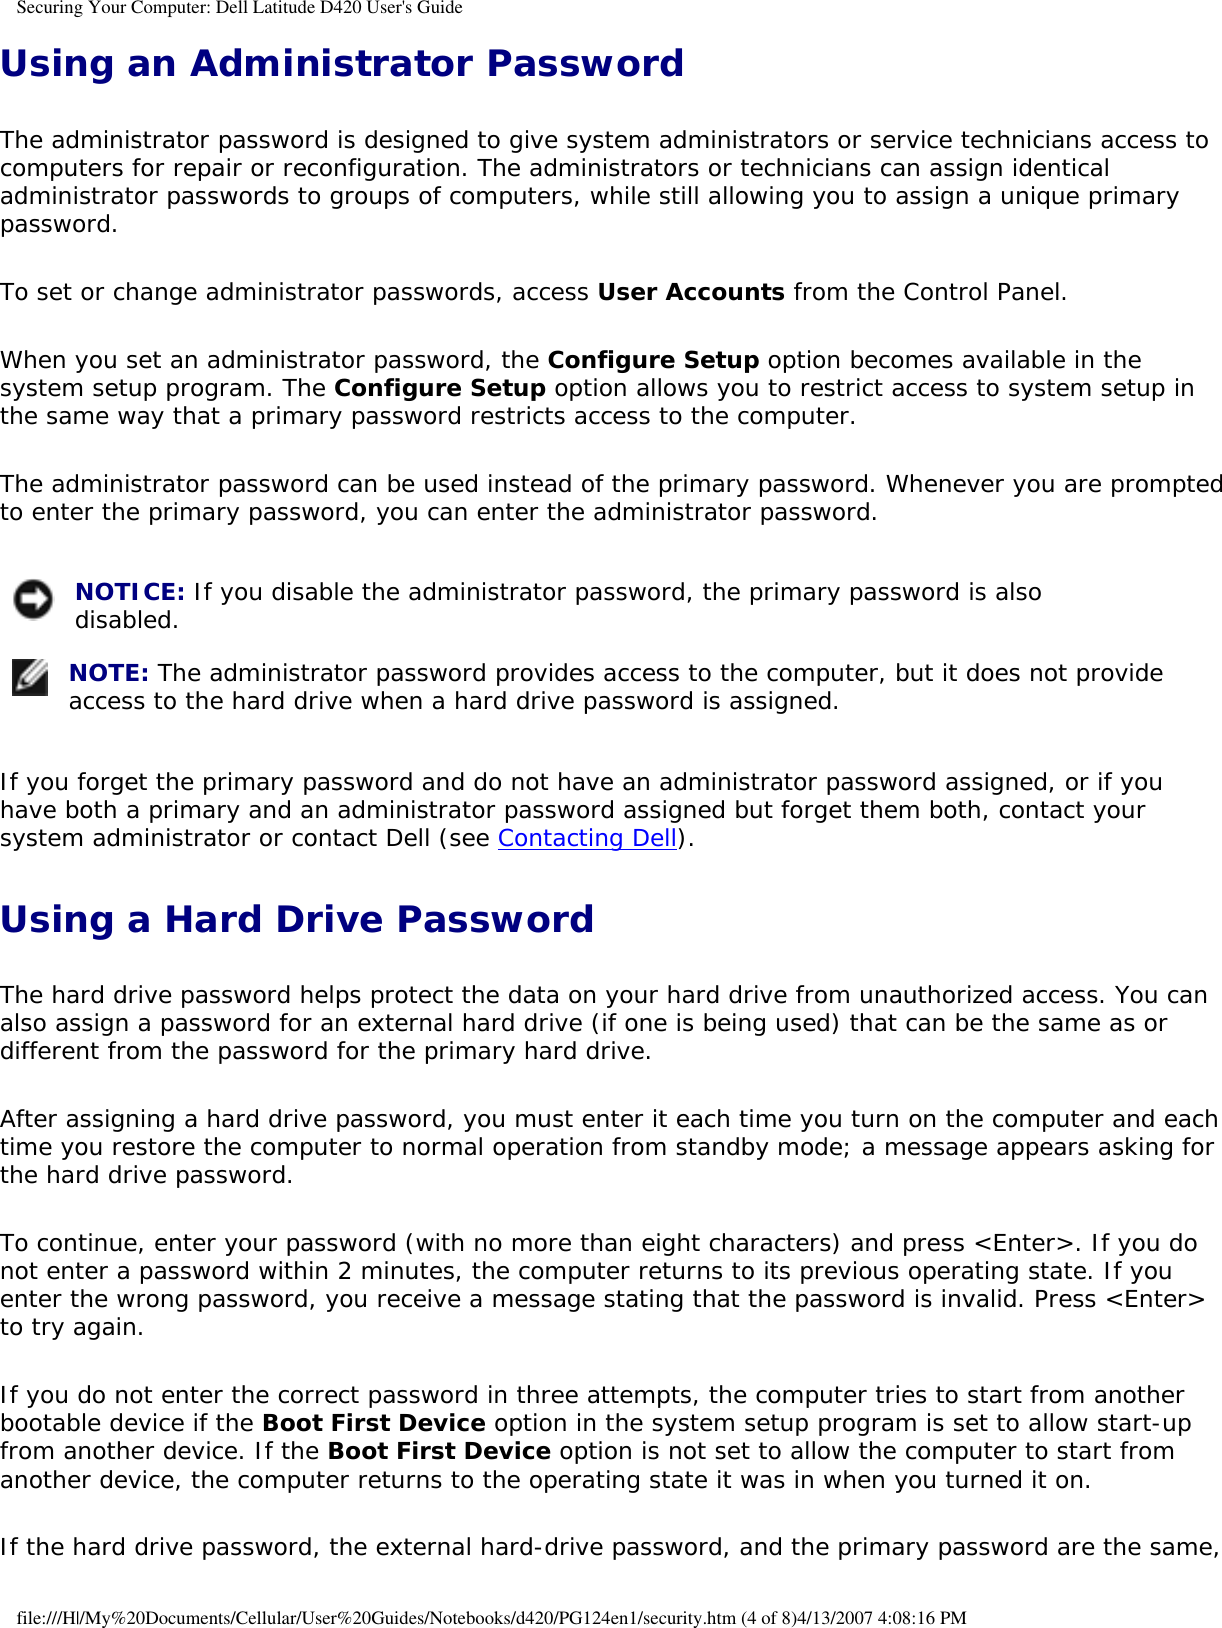 Securing Your Computer: Dell Latitude D420 User&apos;s GuideUsing an Administrator PasswordThe administrator password is designed to give system administrators or service technicians access to computers for repair or reconfiguration. The administrators or technicians can assign identical administrator passwords to groups of computers, while still allowing you to assign a unique primary password.To set or change administrator passwords, access User Accounts from the Control Panel.When you set an administrator password, the Configure Setup option becomes available in the system setup program. The Configure Setup option allows you to restrict access to system setup in the same way that a primary password restricts access to the computer.The administrator password can be used instead of the primary password. Whenever you are prompted to enter the primary password, you can enter the administrator password. NOTICE: If you disable the administrator password, the primary password is also disabled.  NOTE: The administrator password provides access to the computer, but it does not provide access to the hard drive when a hard drive password is assigned. If you forget the primary password and do not have an administrator password assigned, or if you have both a primary and an administrator password assigned but forget them both, contact your system administrator or contact Dell (see Contacting Dell).Using a Hard Drive PasswordThe hard drive password helps protect the data on your hard drive from unauthorized access. You can also assign a password for an external hard drive (if one is being used) that can be the same as or different from the password for the primary hard drive.After assigning a hard drive password, you must enter it each time you turn on the computer and each time you restore the computer to normal operation from standby mode; a message appears asking for the hard drive password.To continue, enter your password (with no more than eight characters) and press &lt;Enter&gt;. If you do not enter a password within 2 minutes, the computer returns to its previous operating state. If you enter the wrong password, you receive a message stating that the password is invalid. Press &lt;Enter&gt; to try again.If you do not enter the correct password in three attempts, the computer tries to start from another bootable device if the Boot First Device option in the system setup program is set to allow start-up from another device. If the Boot First Device option is not set to allow the computer to start from another device, the computer returns to the operating state it was in when you turned it on.If the hard drive password, the external hard-drive password, and the primary password are the same, file:///H|/My%20Documents/Cellular/User%20Guides/Notebooks/d420/PG124en1/security.htm (4 of 8)4/13/2007 4:08:16 PM